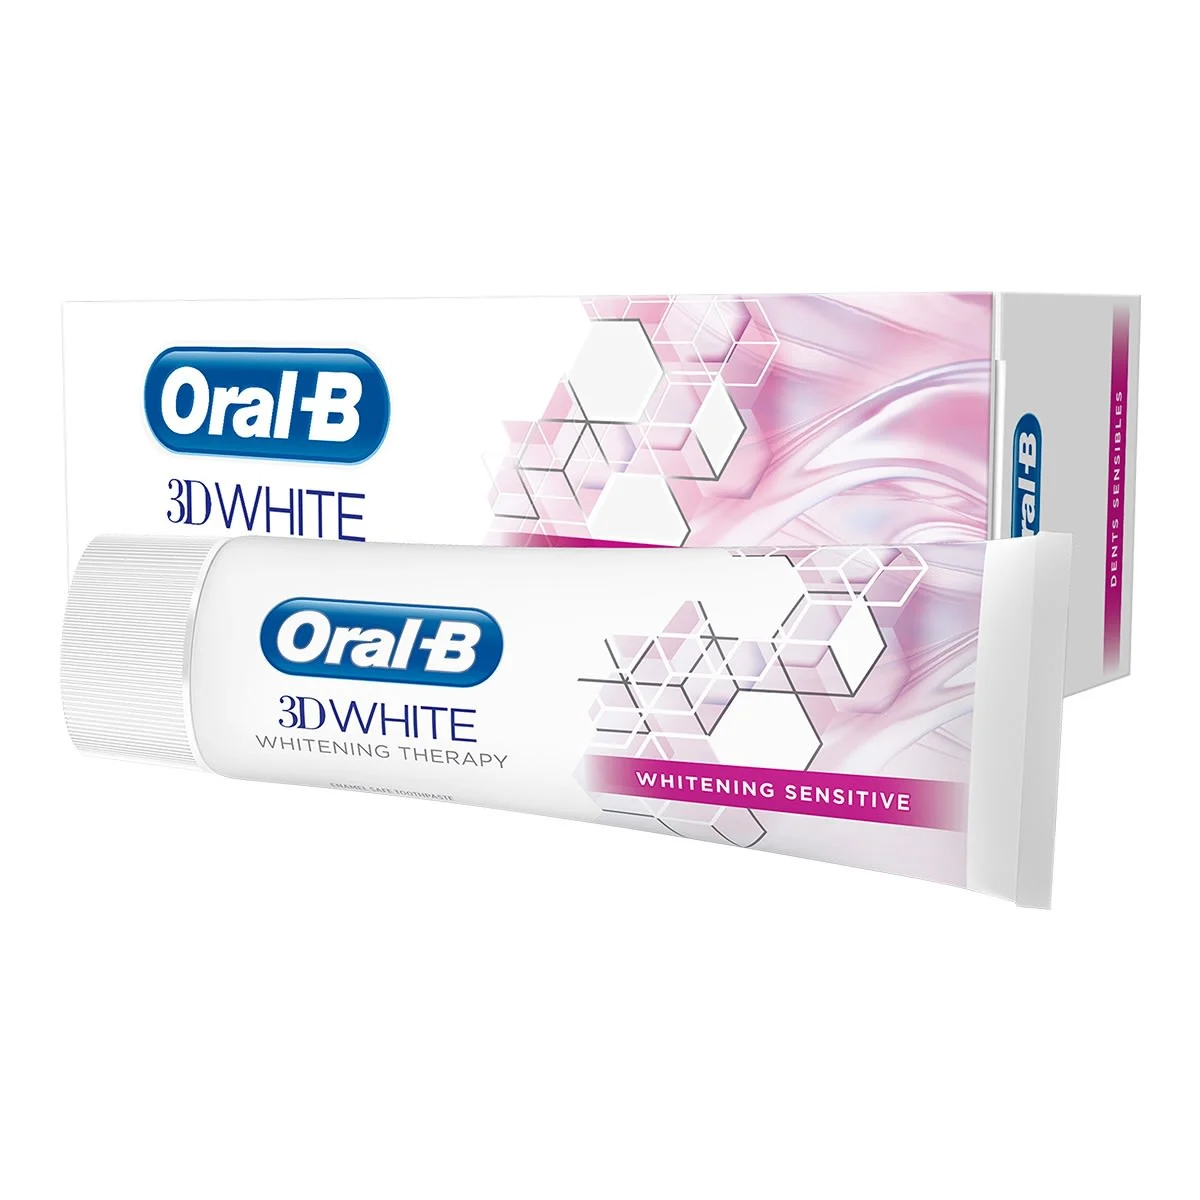 Oral-B 3D White Whitening Therapy Tandkräm 75 ml, Whitening Sensitive undefined